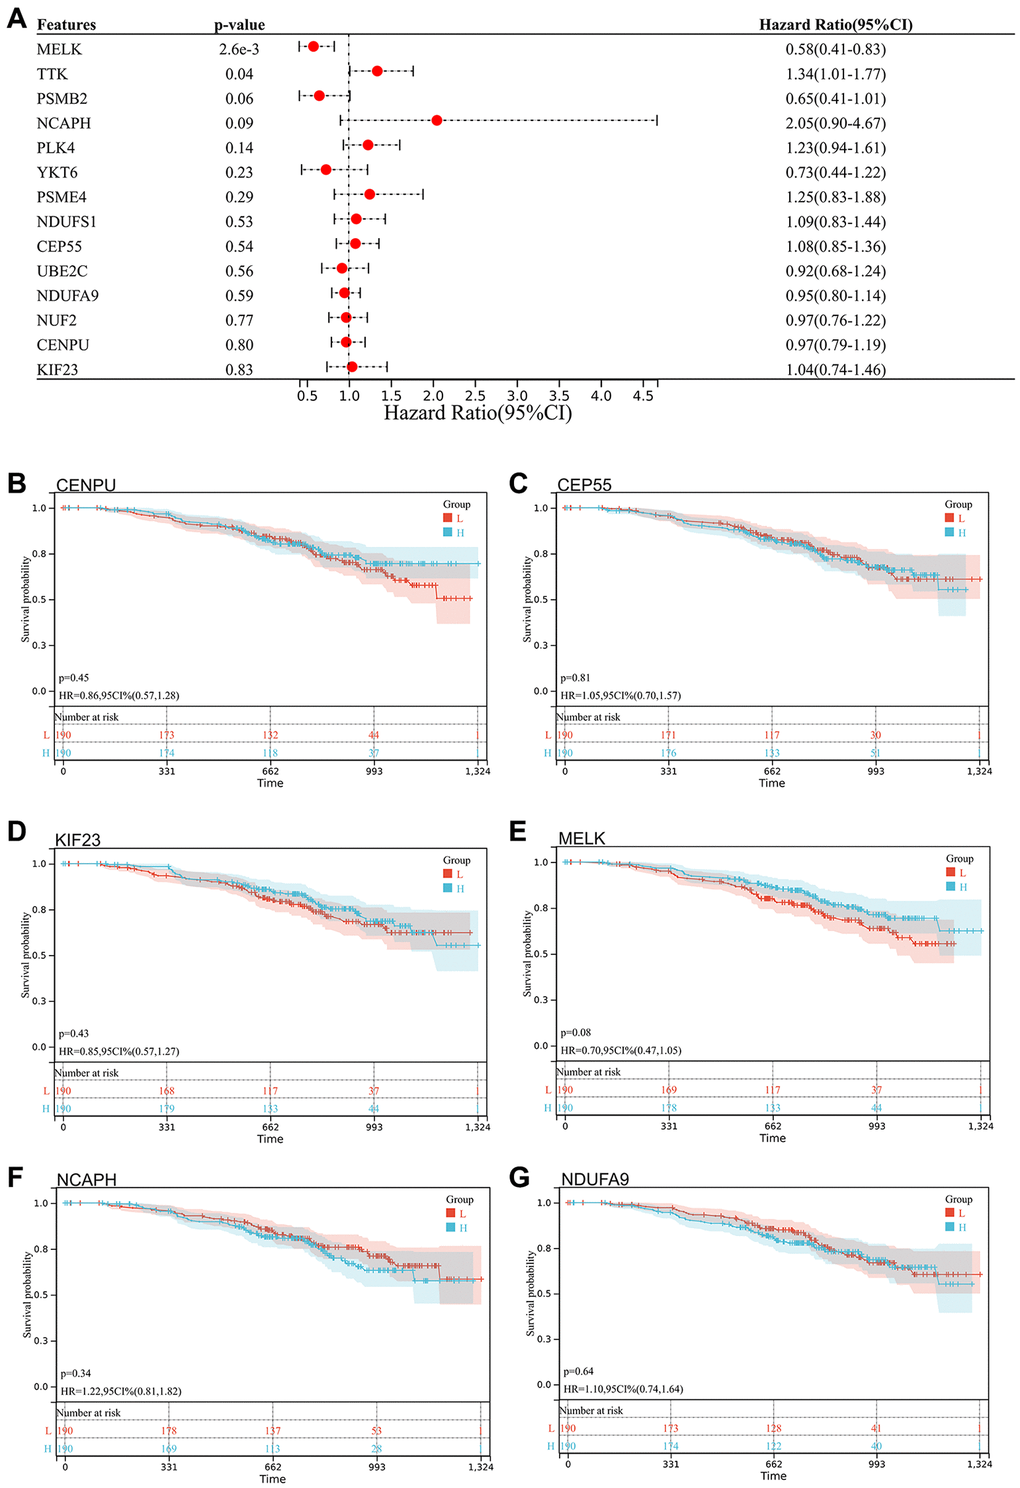 Survival analysis, survivorship curve. (A) Survival data of 14 core genes with significantly different expression and GSE140082; (B) CENPU: p = 0.45, HR = 0.86, 95% CI (0.57, 1.28); (C) CEP55: p = 0.81, HR = 1.05, 95% CI (0.70, 1.57); (D) KIF23: p = 0.43, HR = 0.85, 95% CI (0.57, 1.27); (E) MELK: p = 0.08, HR = 0.70, 95% CI (0.47, 1.05); (F) NCAPH: p = 0.34, HR = 1.22, 95% CI (0.81, 1.82); (G) NDUFA9: p = 0.64, HR = 1.10, 95% CI (0.74, 1.64).